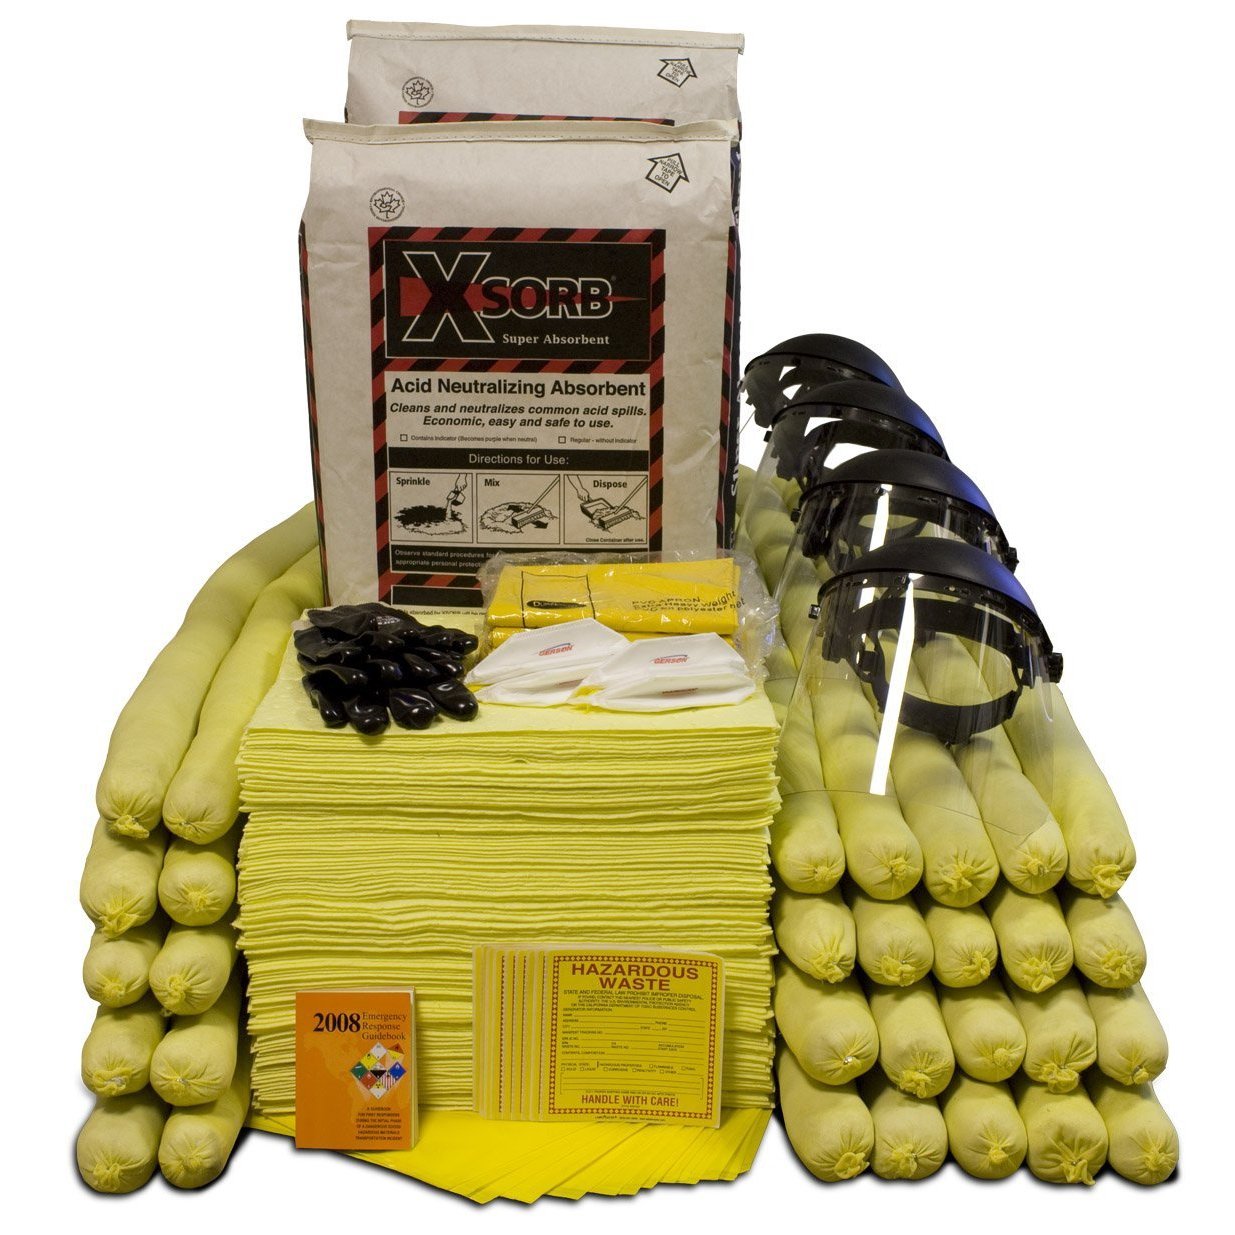 XSORB Acid Neutralizing 95 gal Spill Response Kit - 1 OVERPACK-eSafety Supplies, Inc